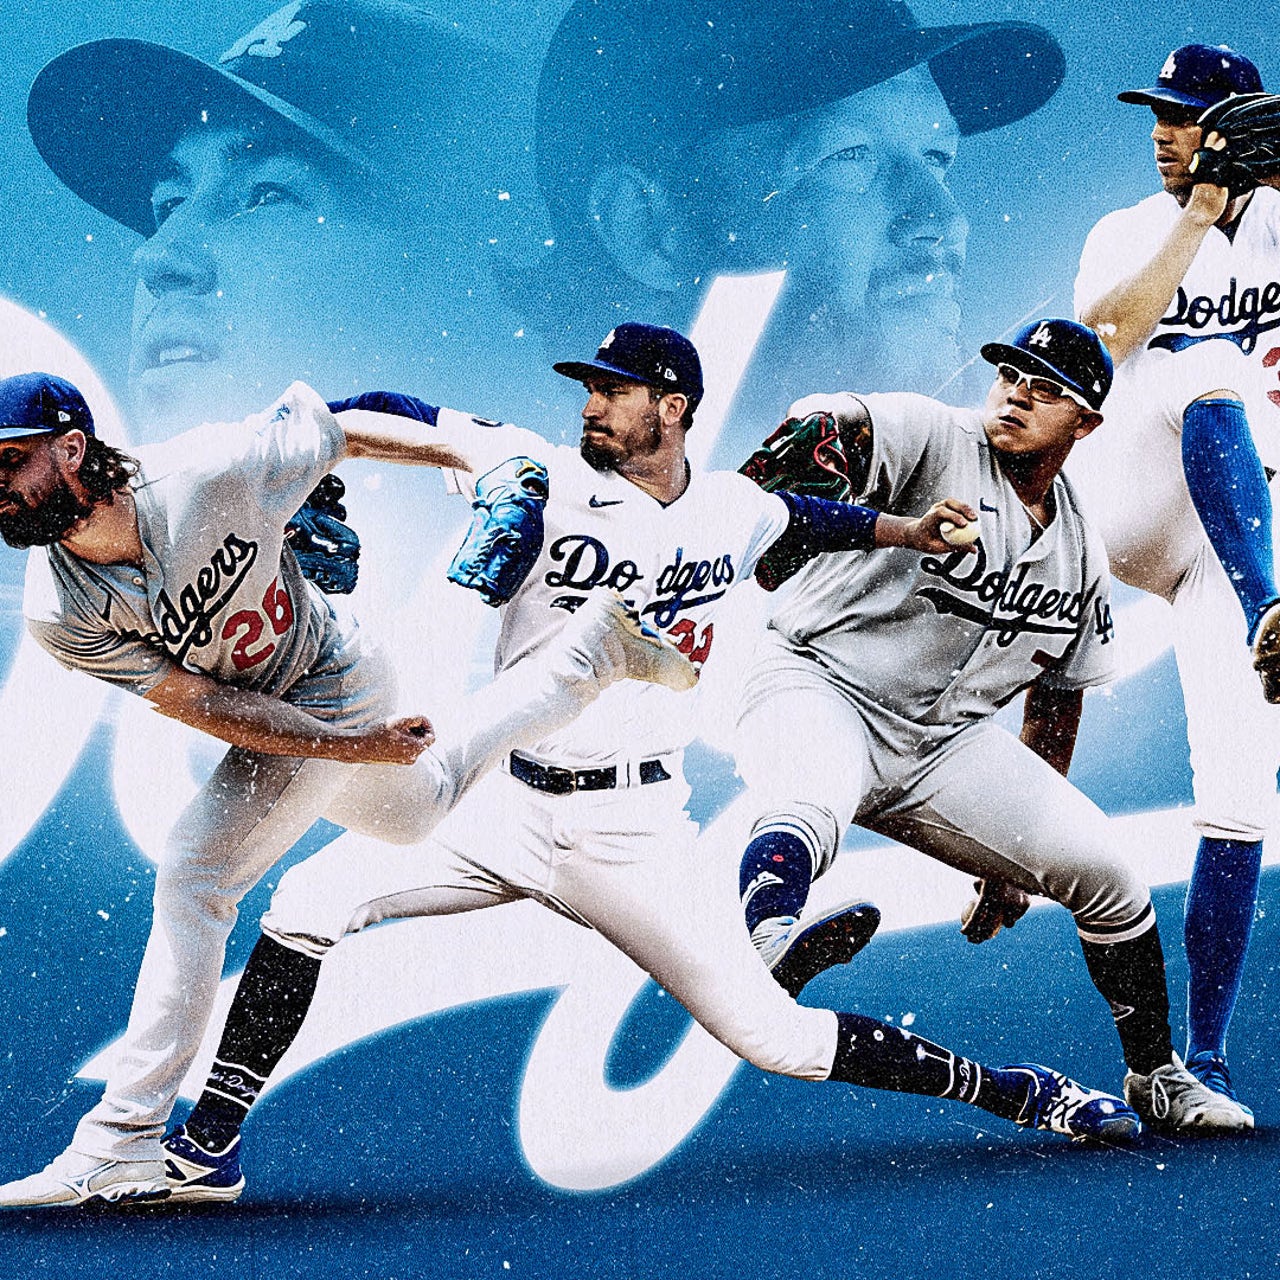 Despite injuries, Dodgers have MLB's best pitching — and could get